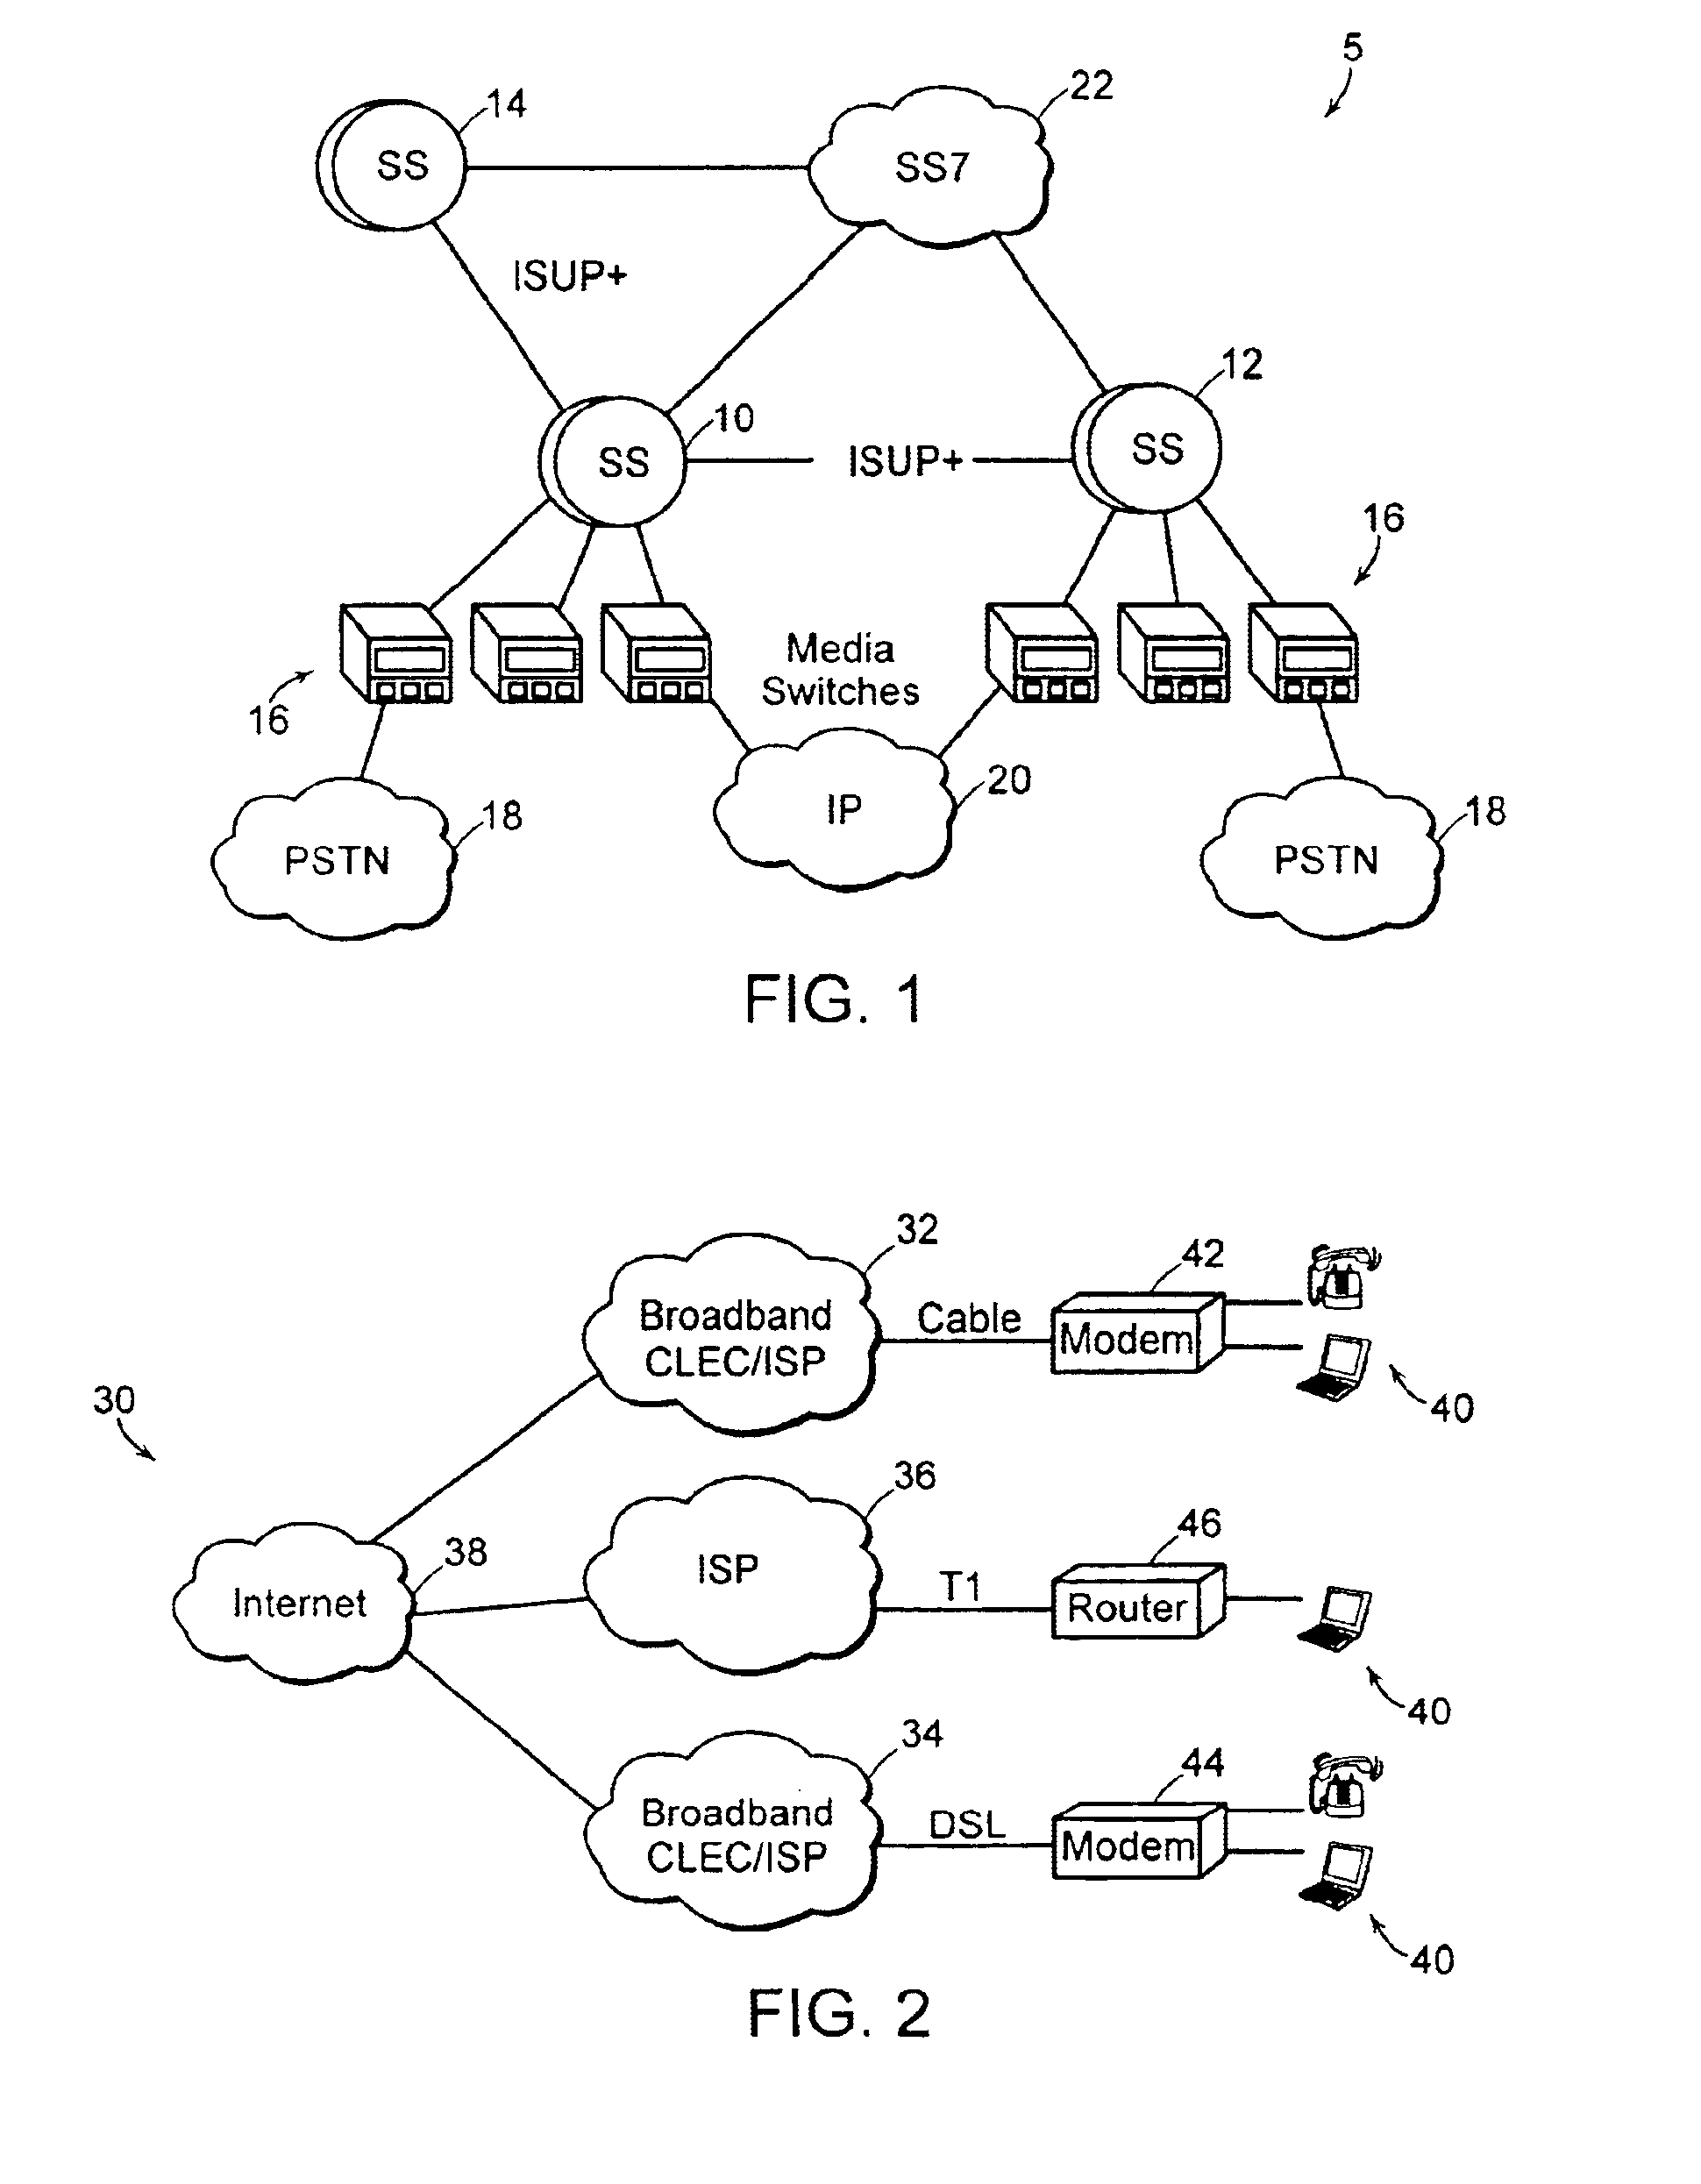 System and method to internetwork telecommunication networks of different protocols